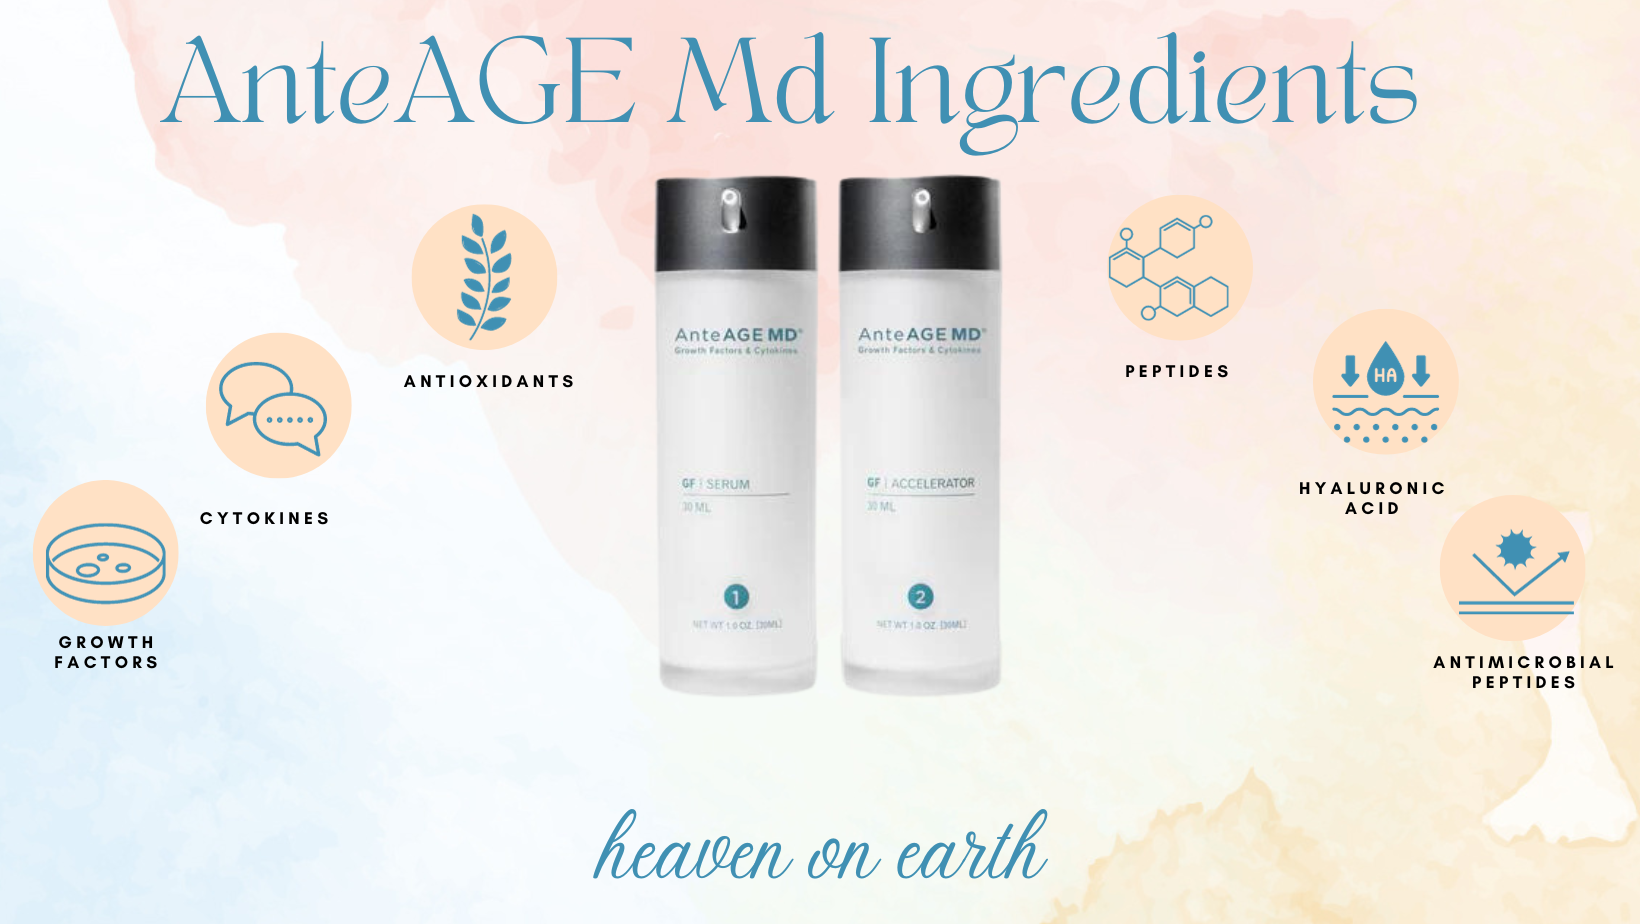 growth factors, cytokines, hyaluronic acid, peptides & antioxidants are components of the AnteAGE system MD